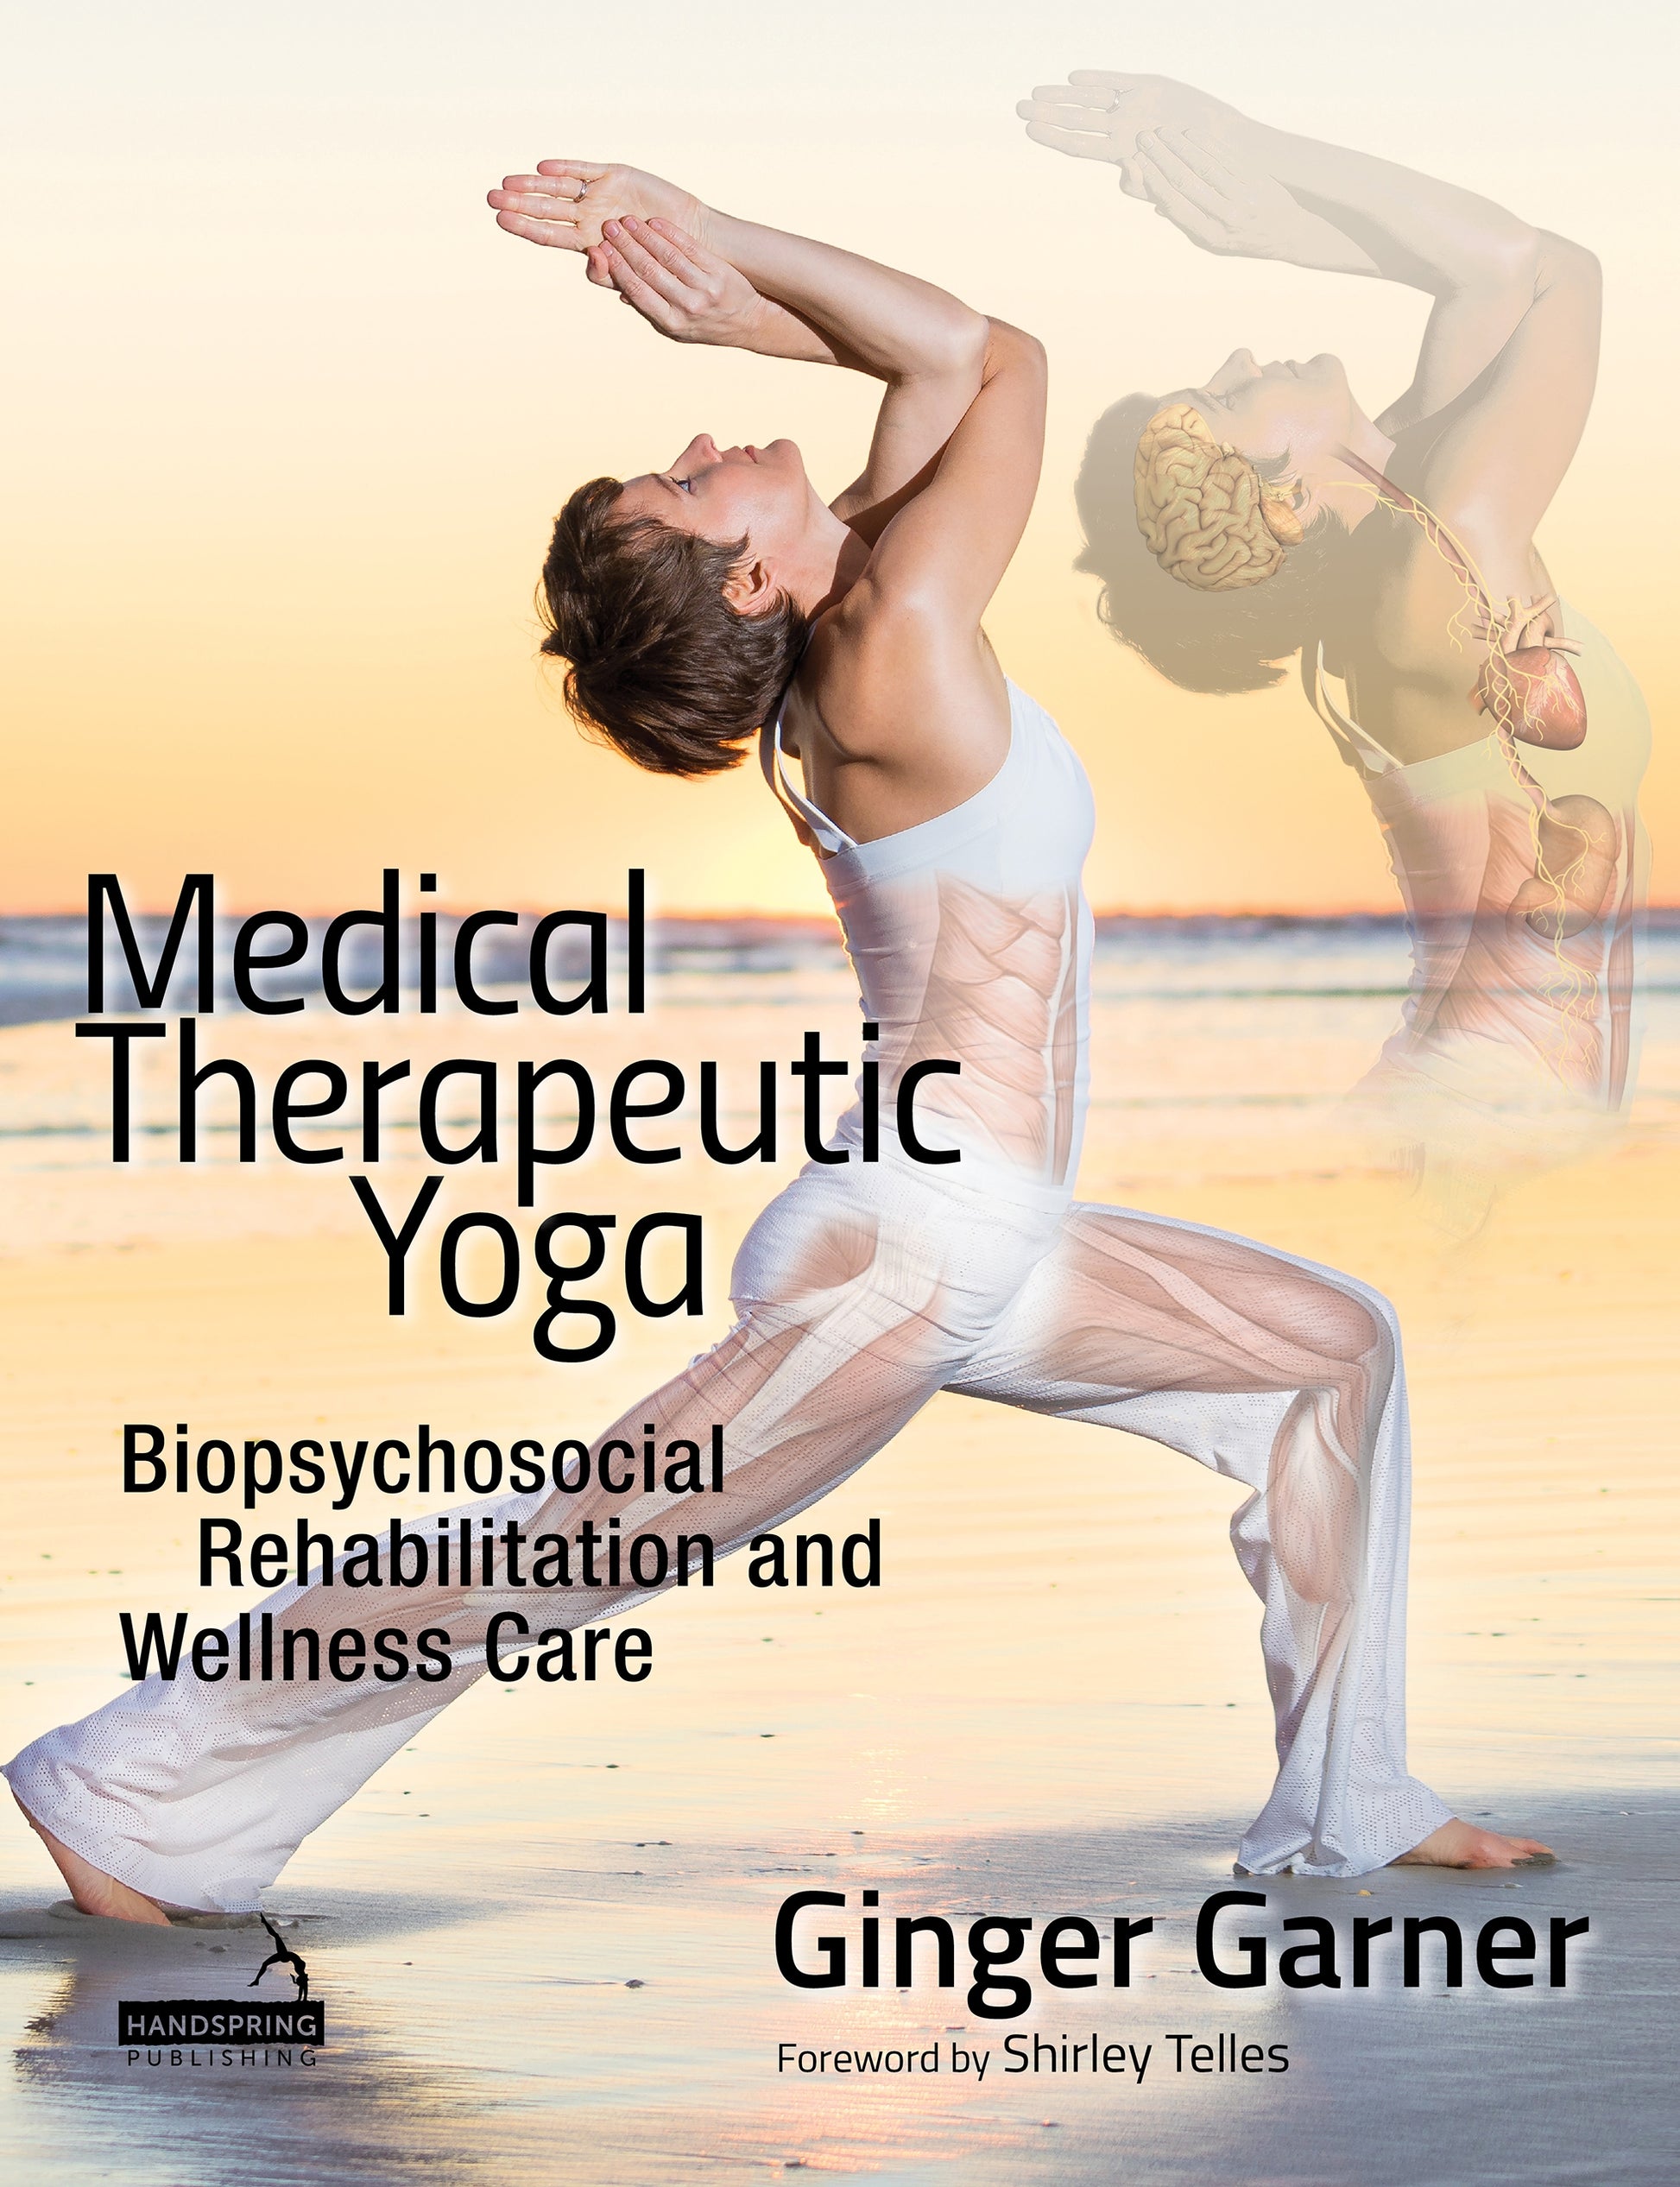 Medical Therapeutic Yoga by Ginger Garner